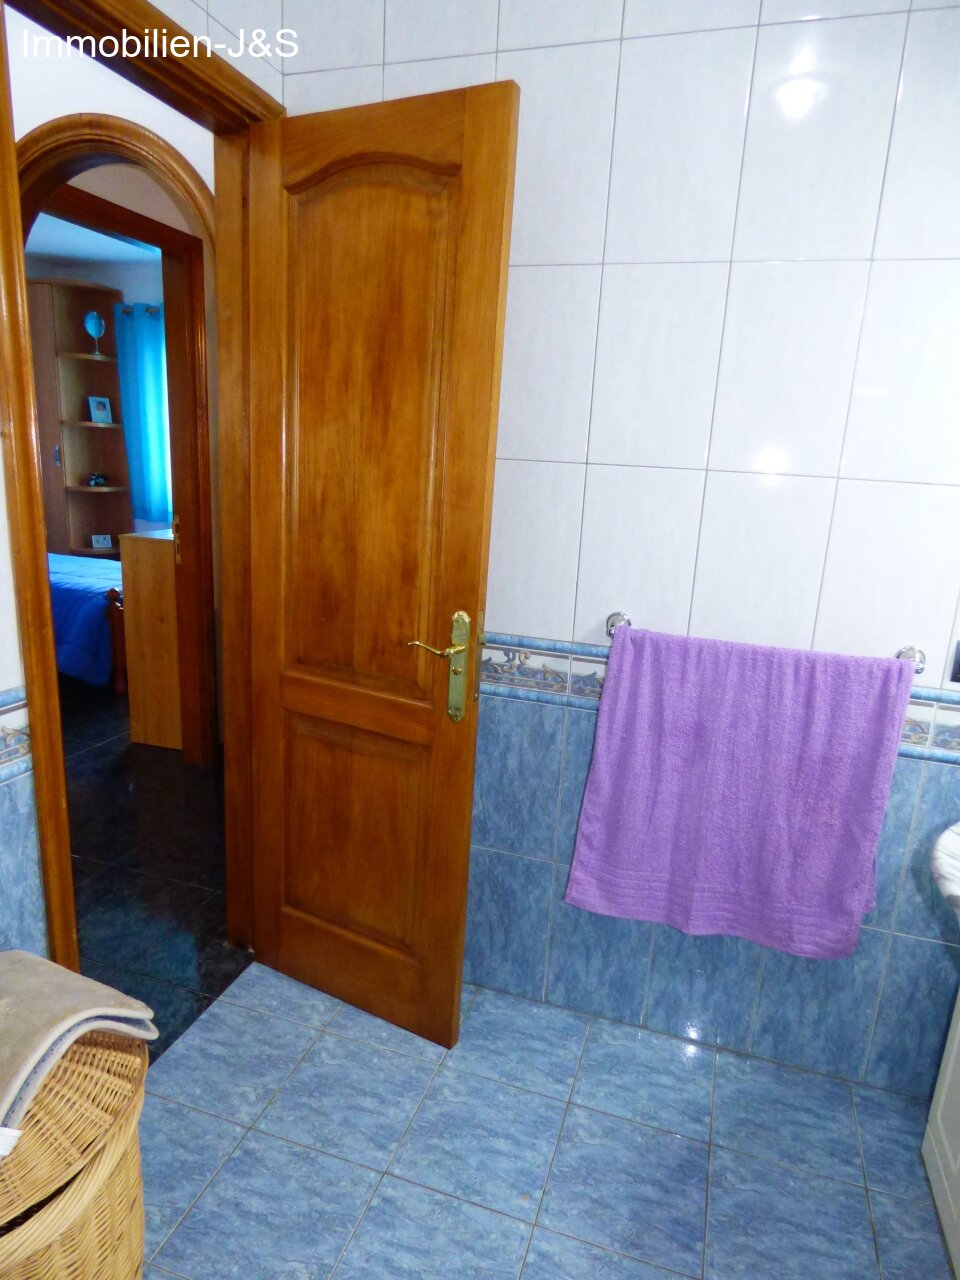 Bathroom upstairs with shower